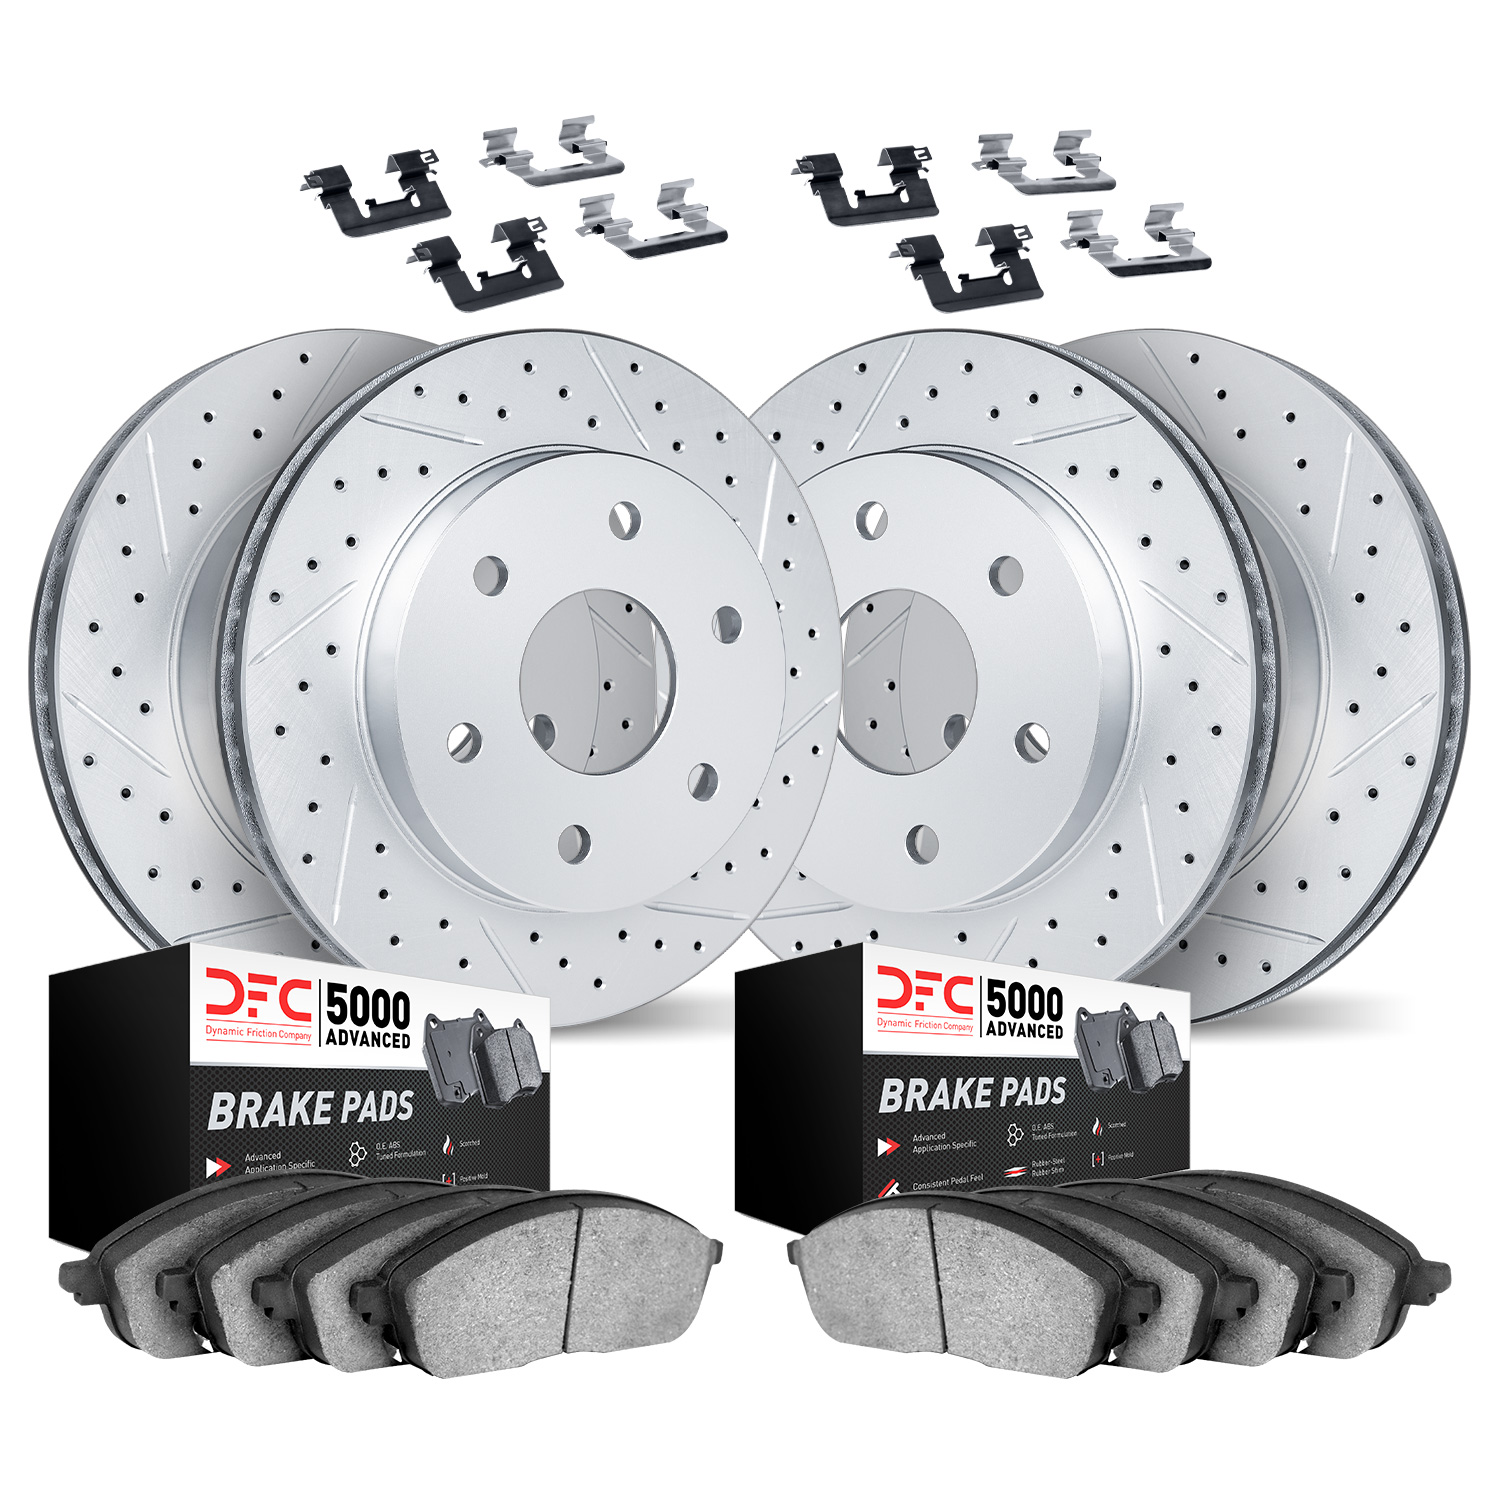 2514-46038 Geoperformance Drilled/Slotted Rotors w/5000 Advanced Brake Pads Kit & Hardware, 2010-2016 GM, Position: Front and Re